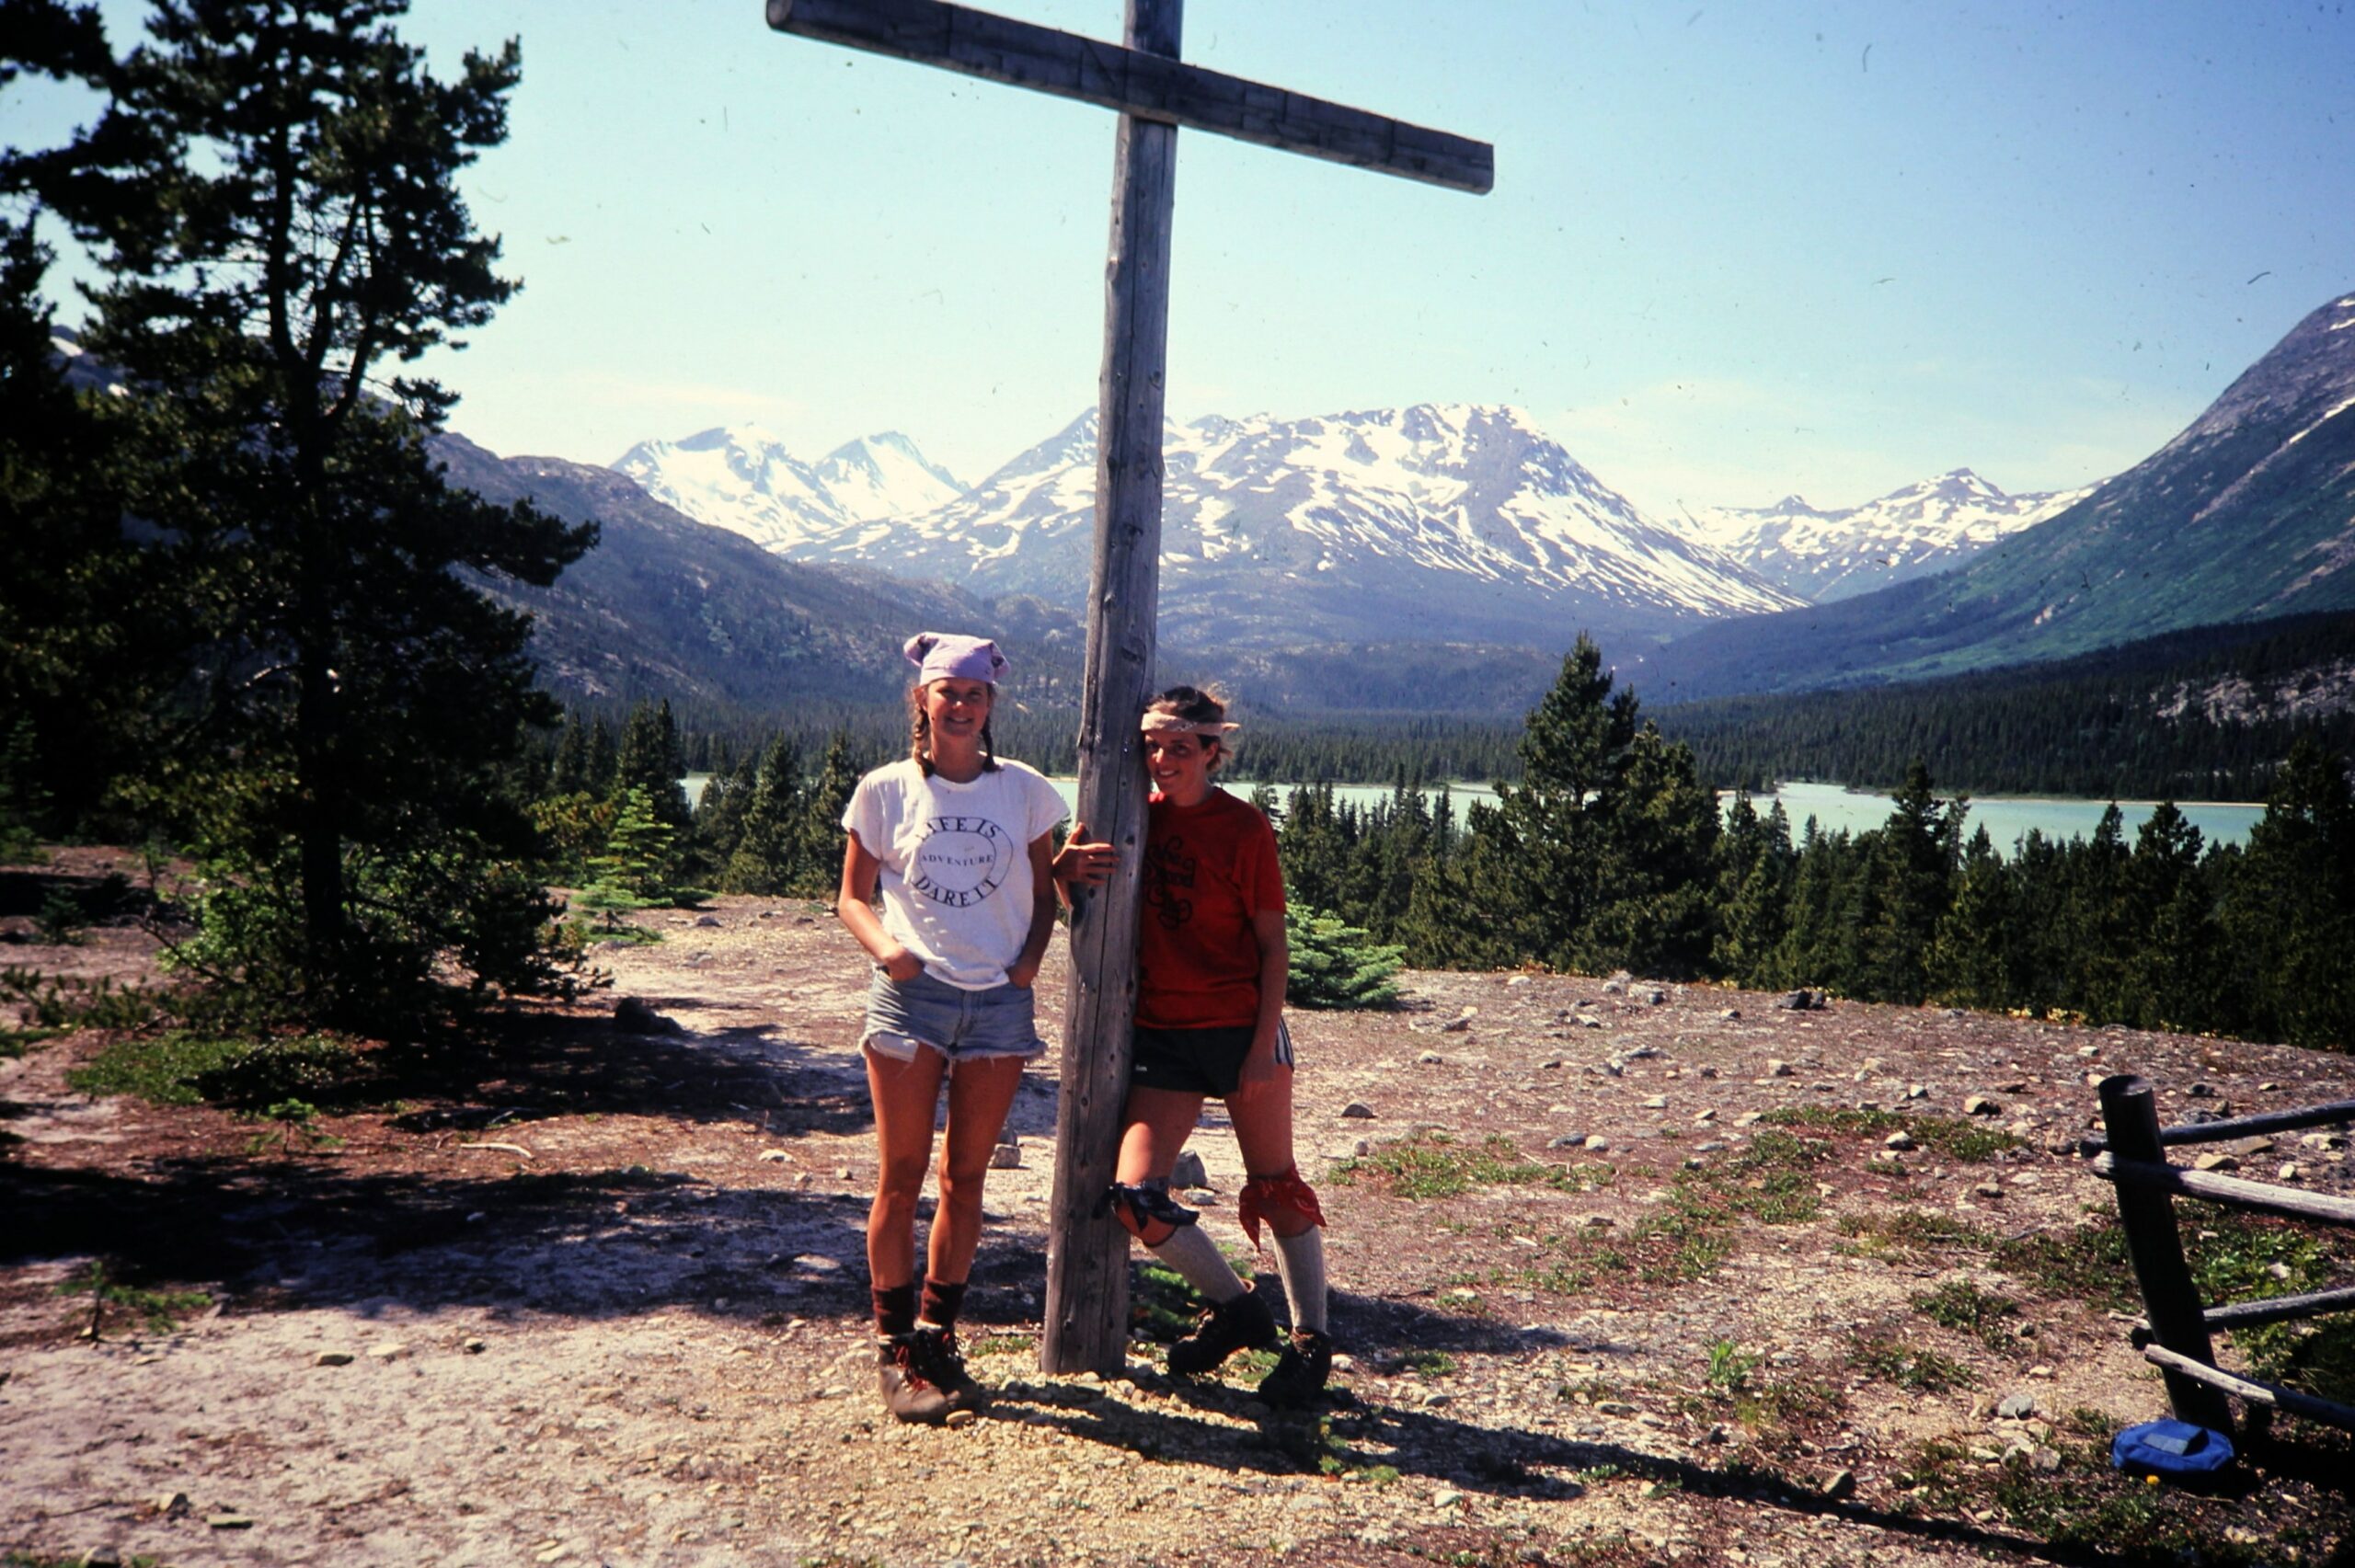 1981 Girls with Lake and Mountains